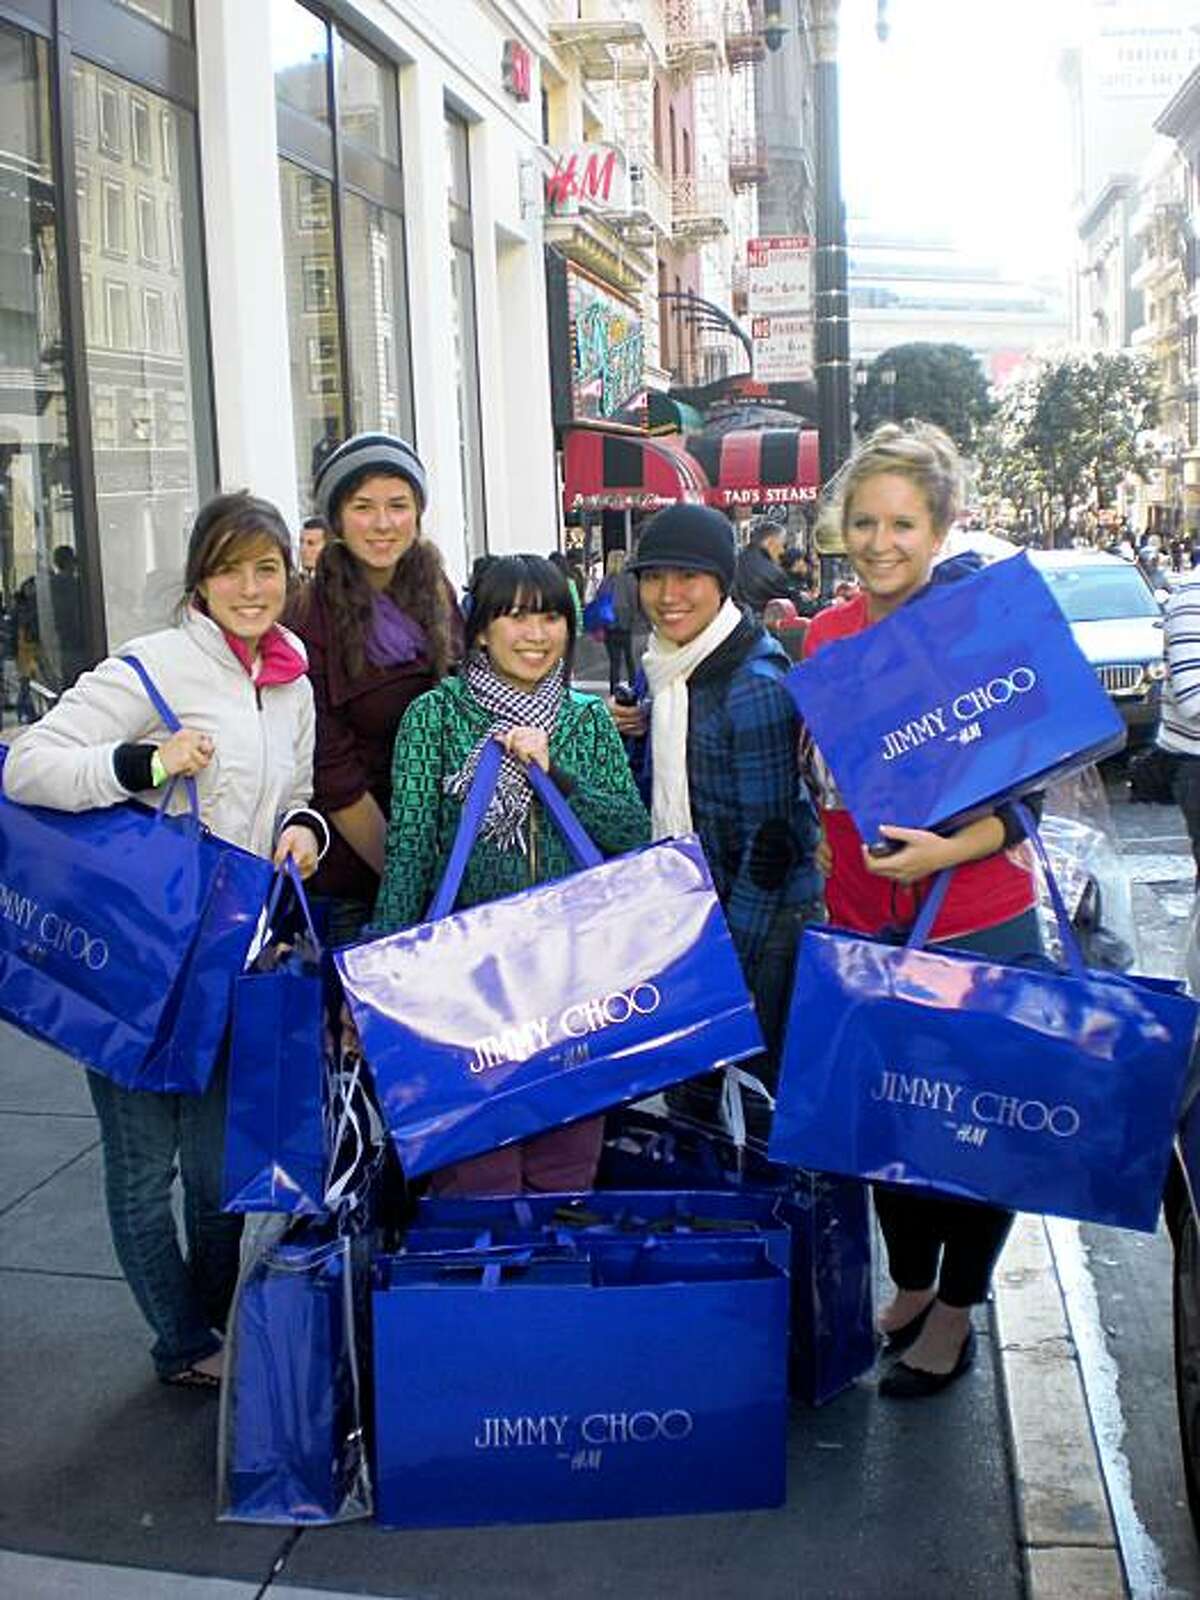 A group of USF students, a.k.a. the "Fab five": Alia Al-Sharif, 21; Alex Platt, 21; Holly Luong, 23; Nghi Lu, 23; and Jo Wiencek, 21. They spent $4,500 altogether on H&M's Jimmy Choo collection, which went on sale Nov. 14 at the Powell Street store.